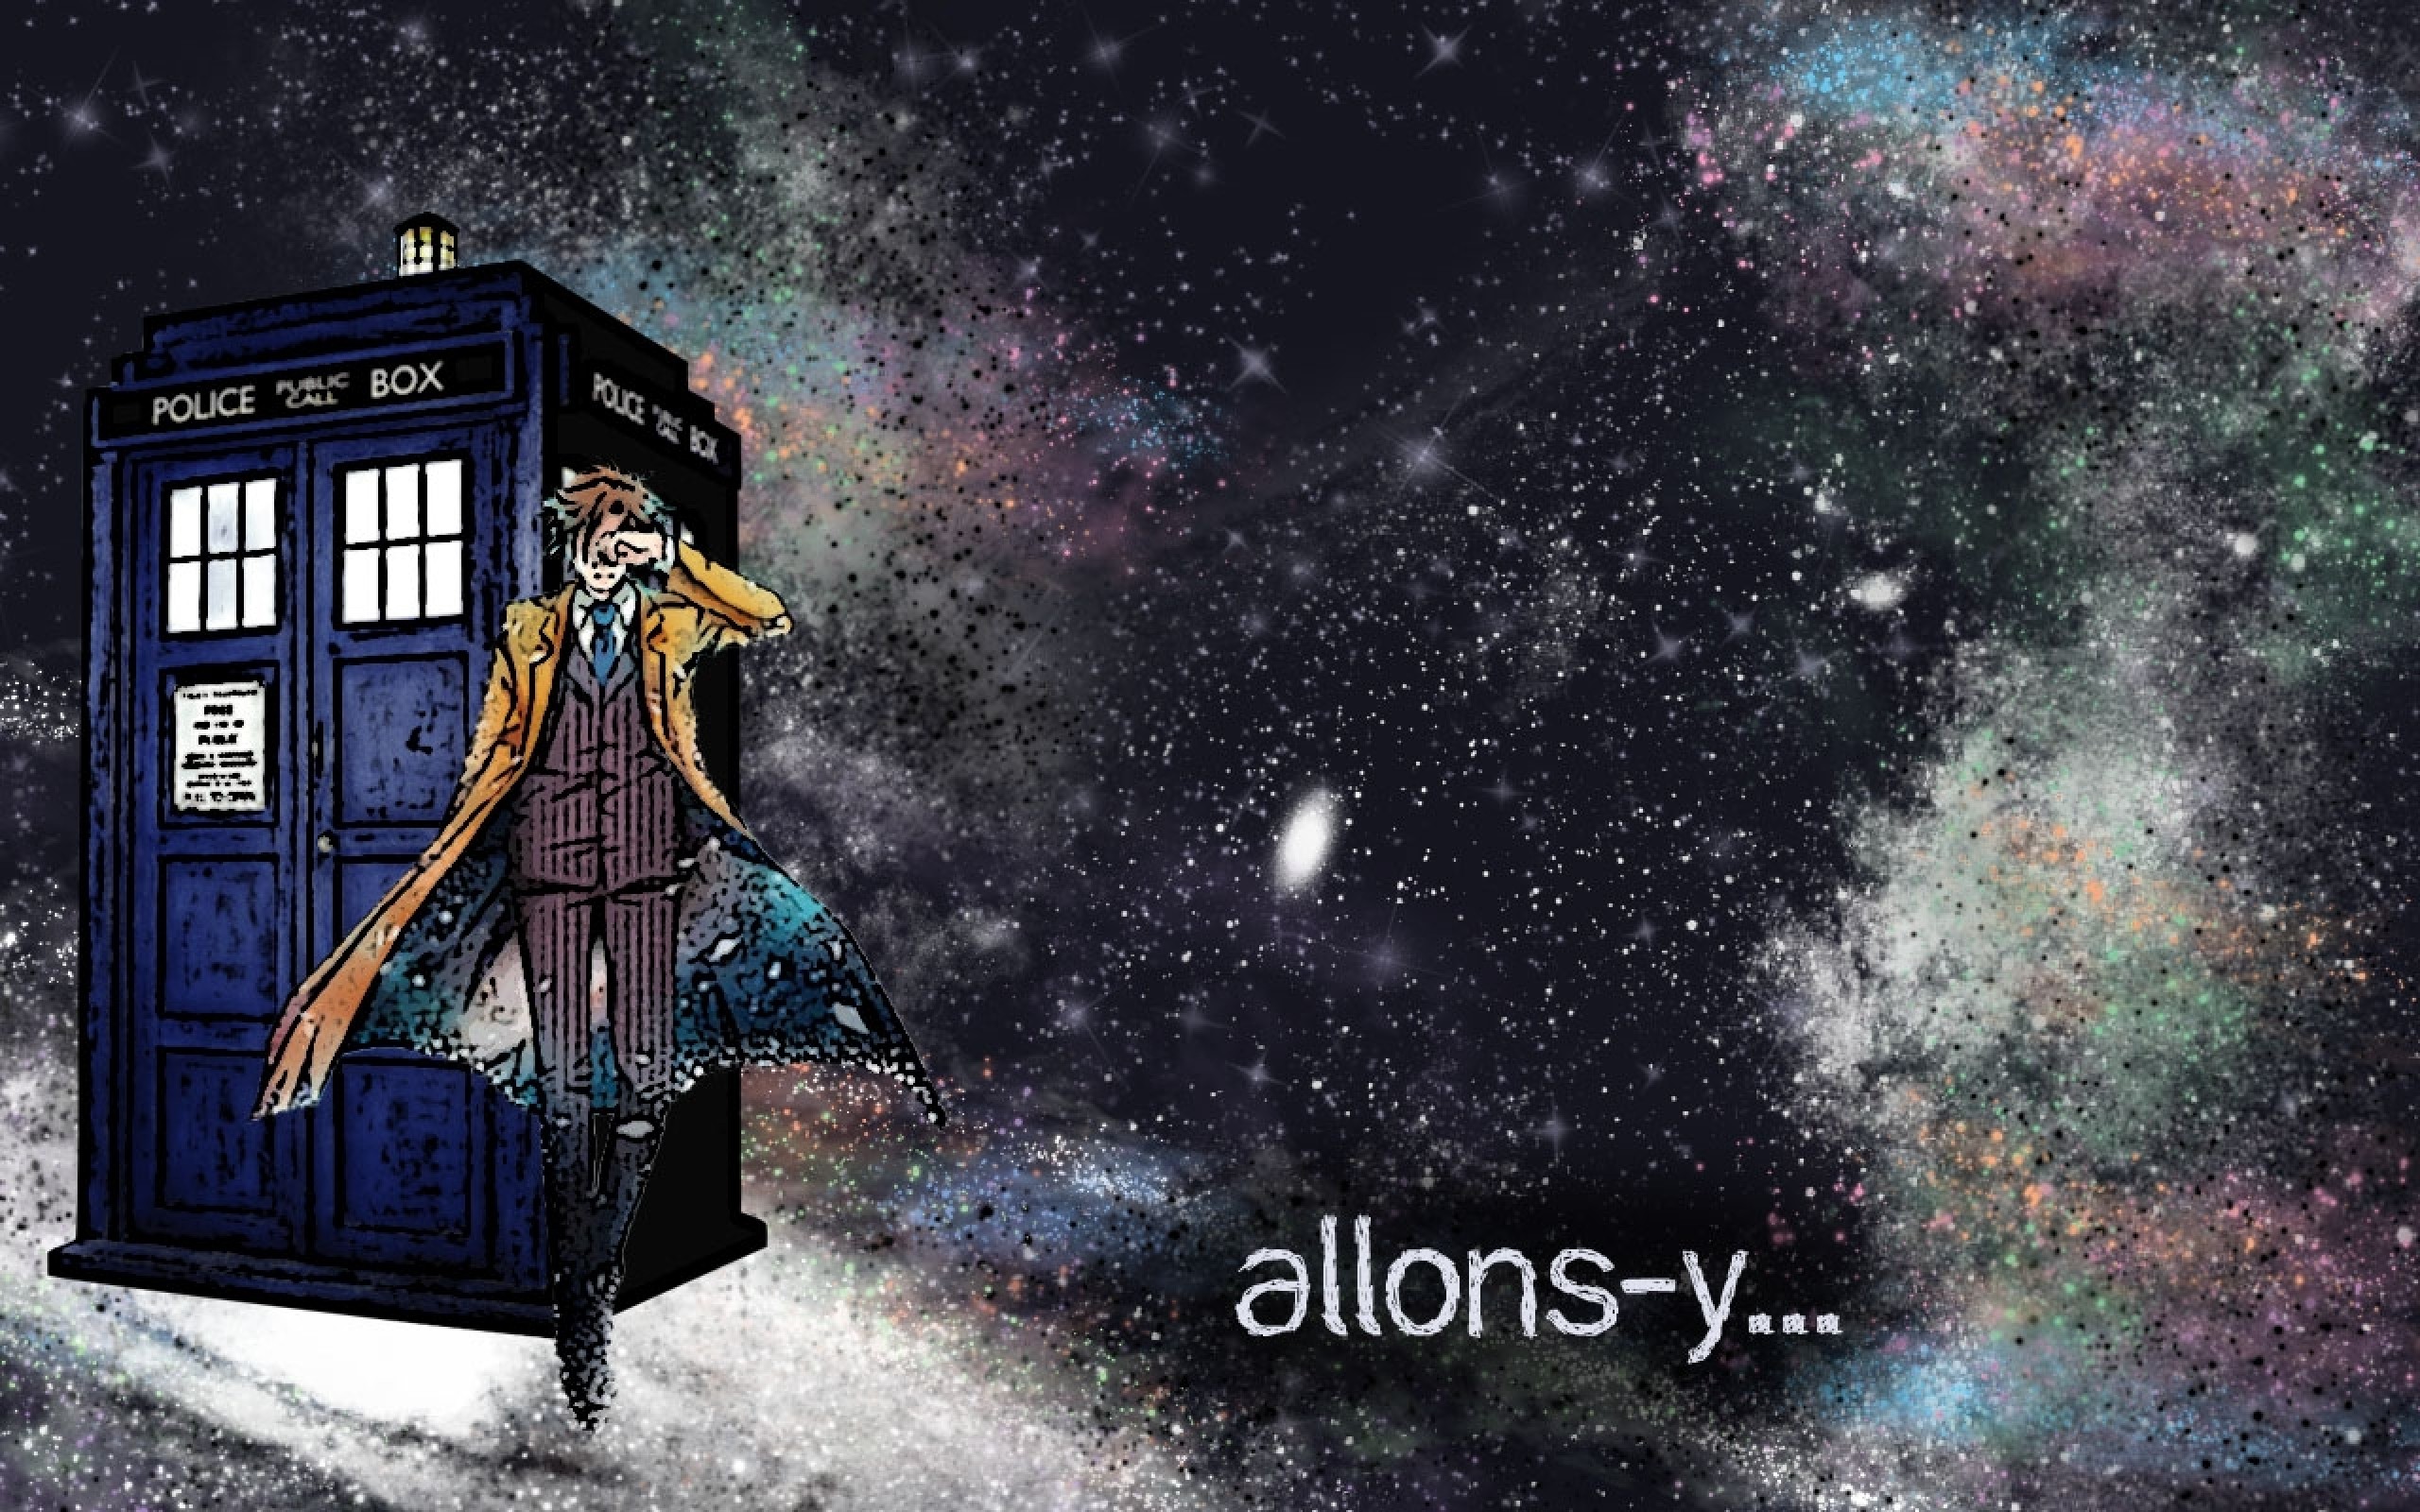 General 2560x1600 Doctor Who The Doctor TARDIS Tenth Doctor science fiction TV series digital art text